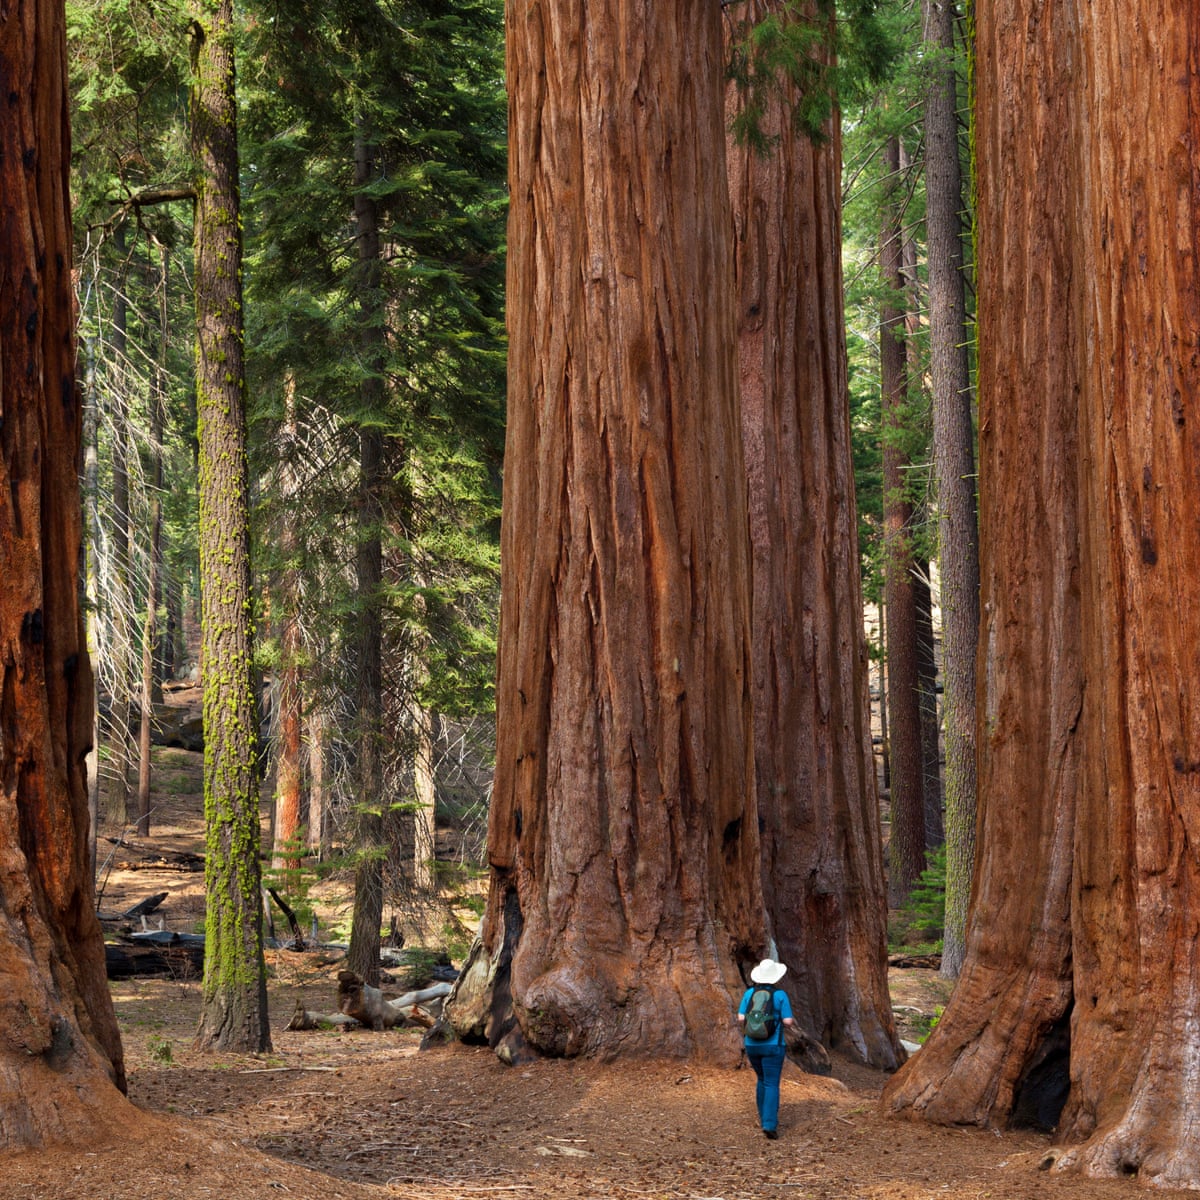 Once they're gone, they're gone': the fight to save the giant sequoia |  California | The Guardian